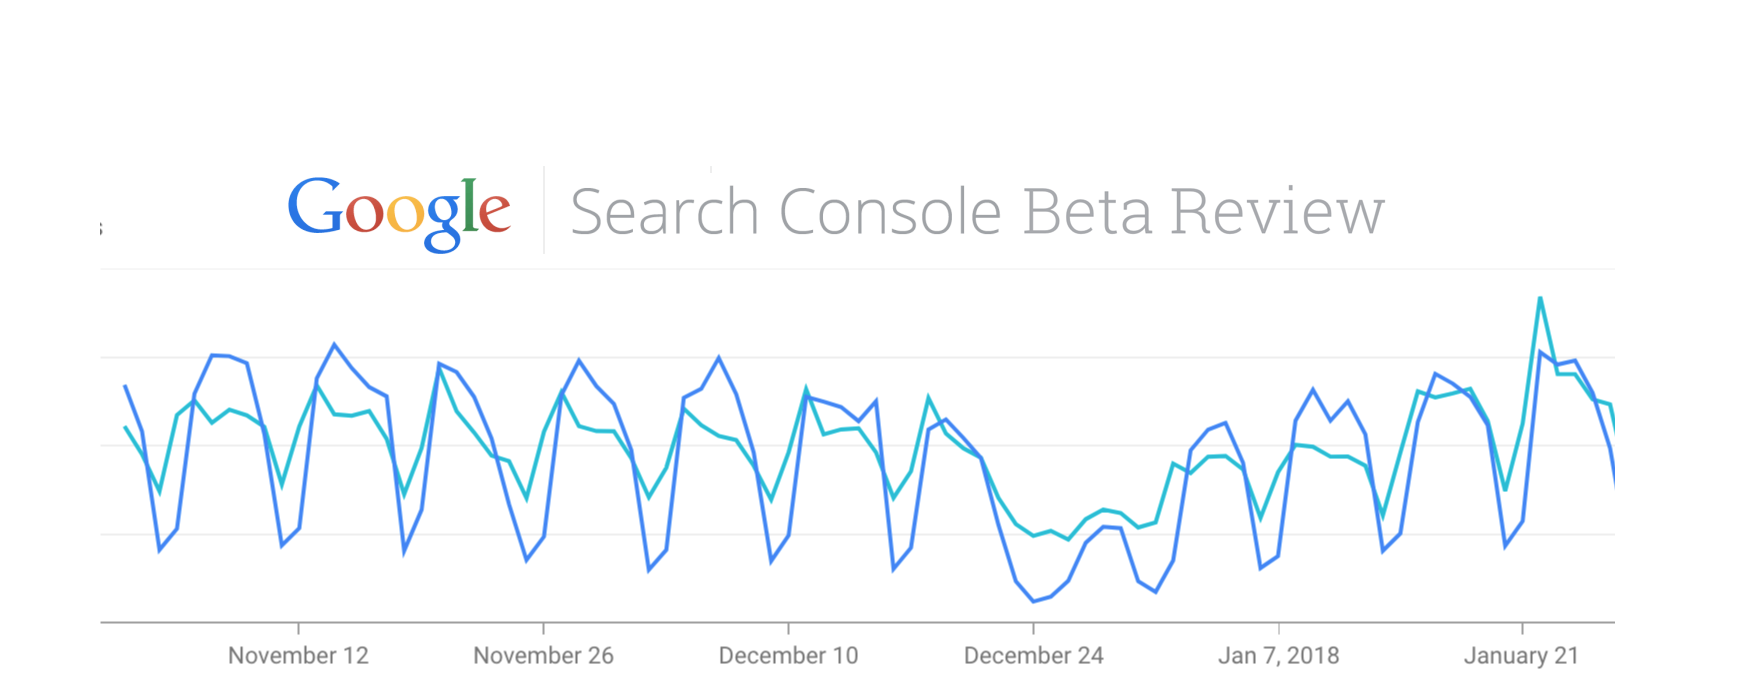 Google Search Console Beta Review